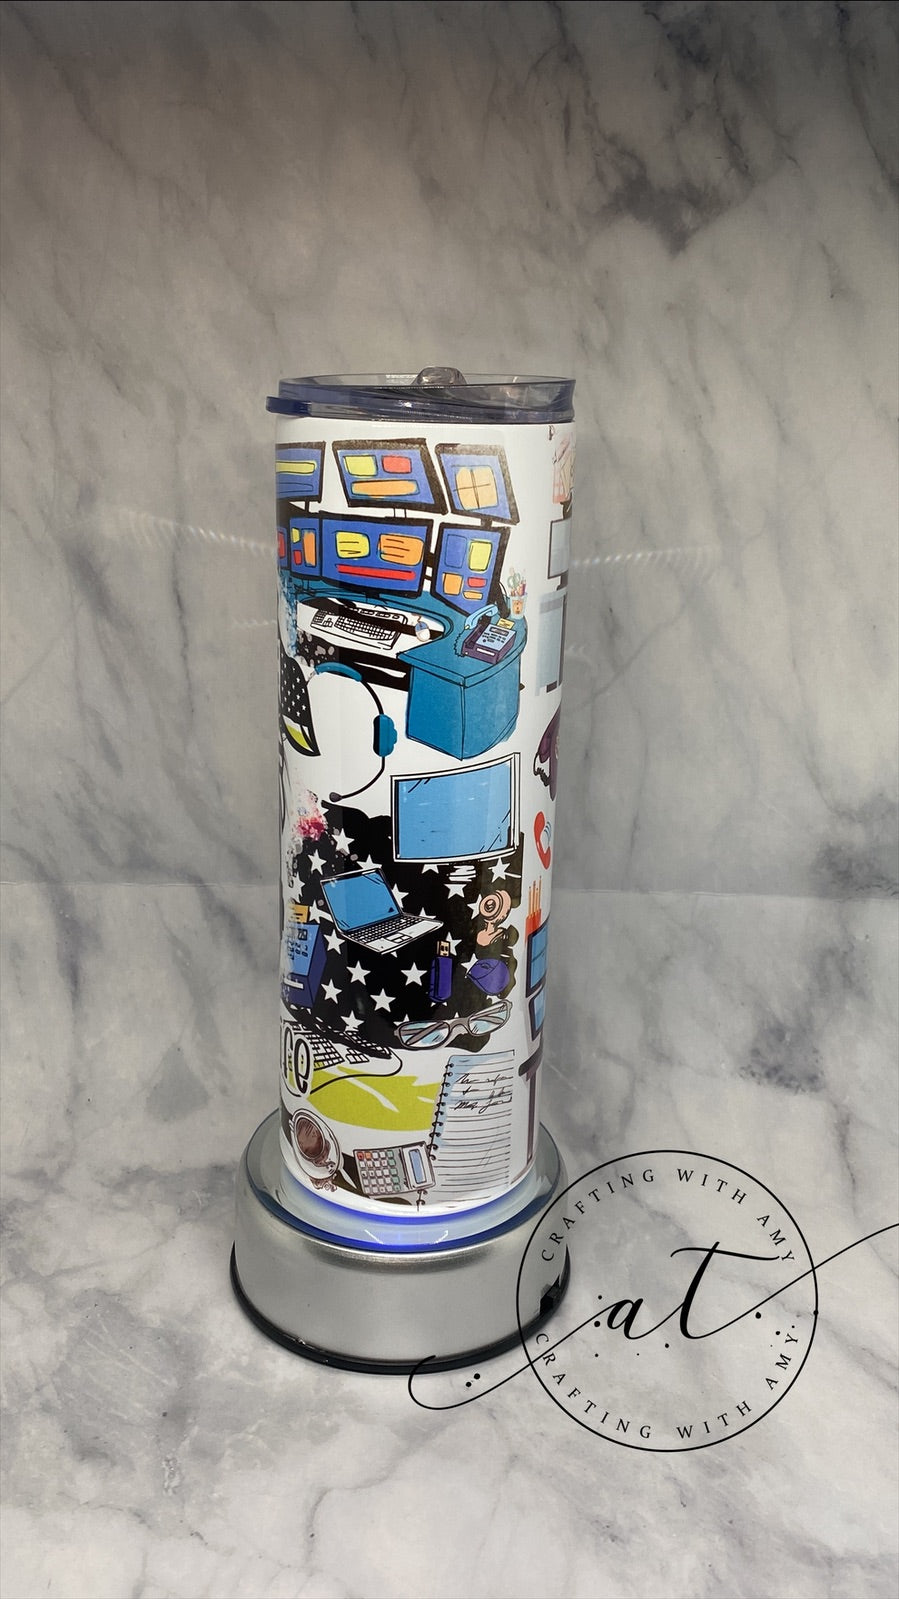 Dispatcher - #Dispatcher - Sublimation Tumbler, Dispatcher - #Dispatcher - sublimation - gliiter - epoxy - tumbler freeshipping - CraftingwithAmy